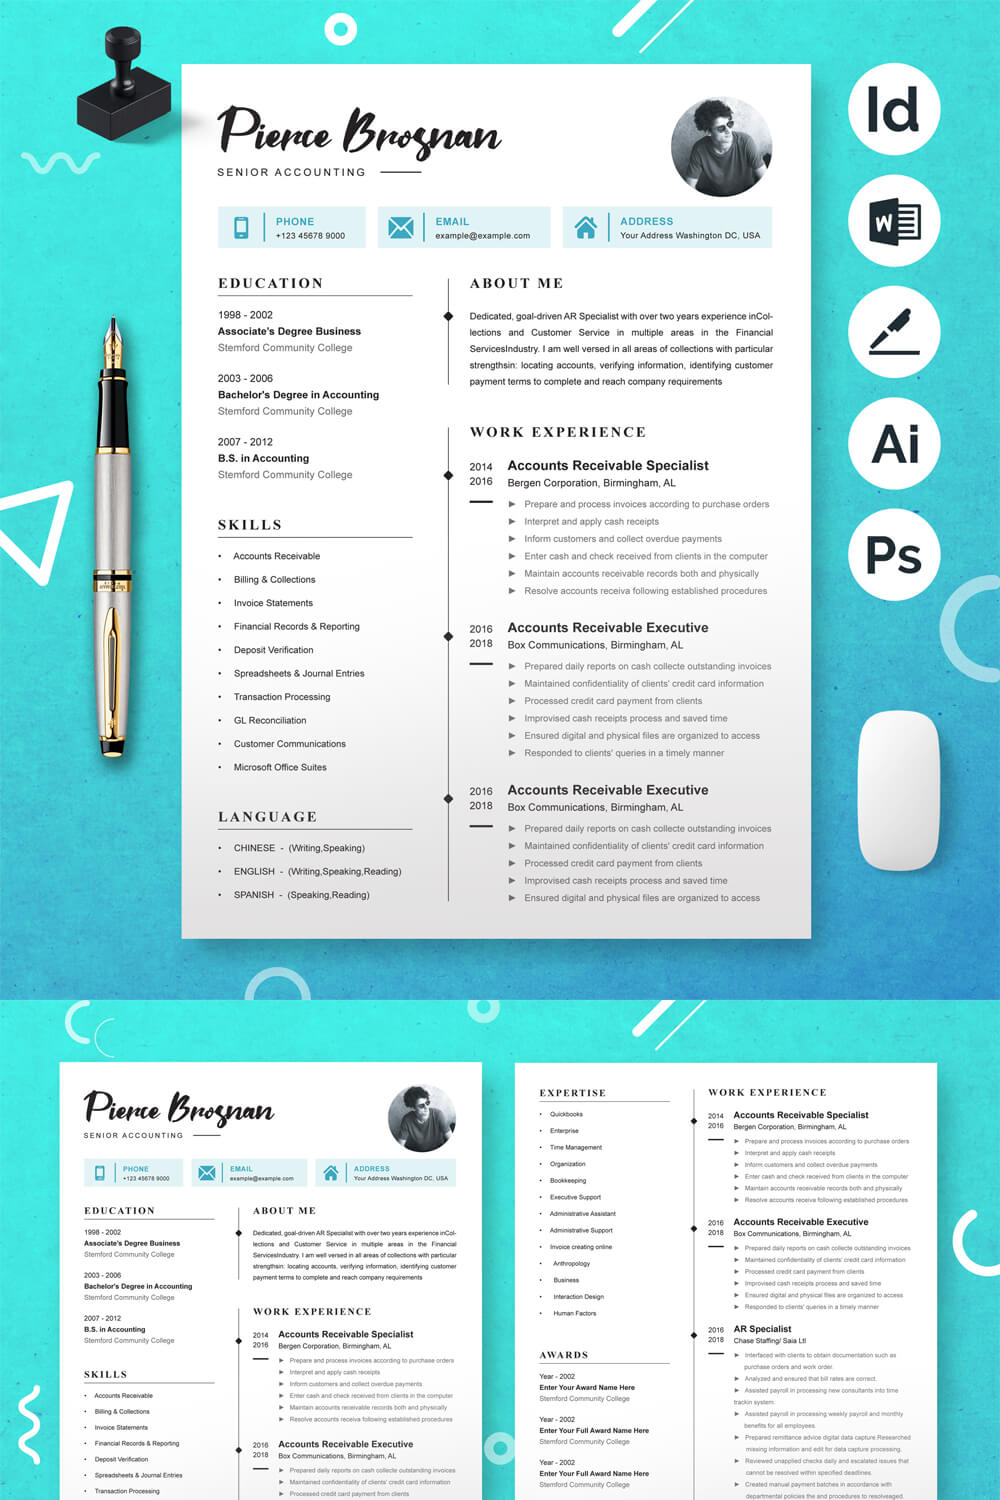 Senior Accounting Reaume Template | Minimal Resume Template pinterest preview image.